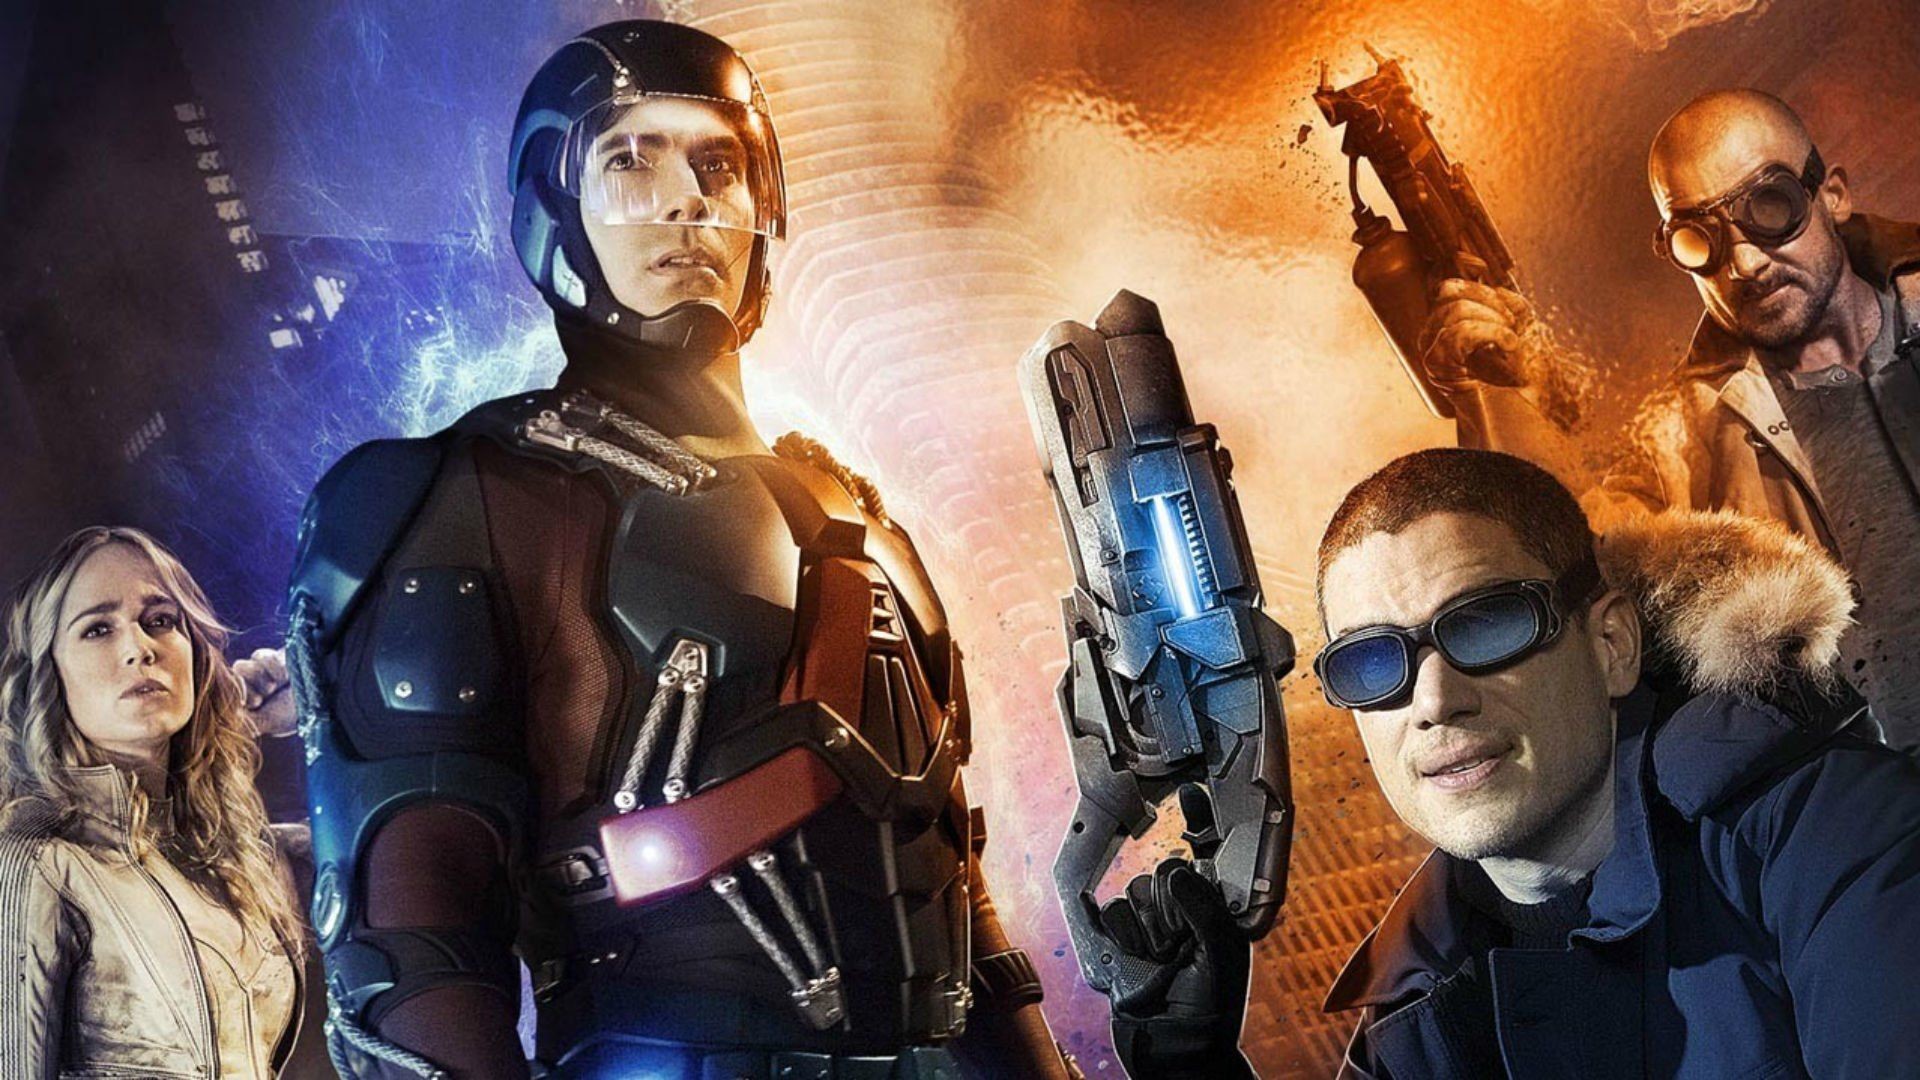 1920x1080 Hawkman and Hawkgirl in Legends of Tomorrow wallpapers